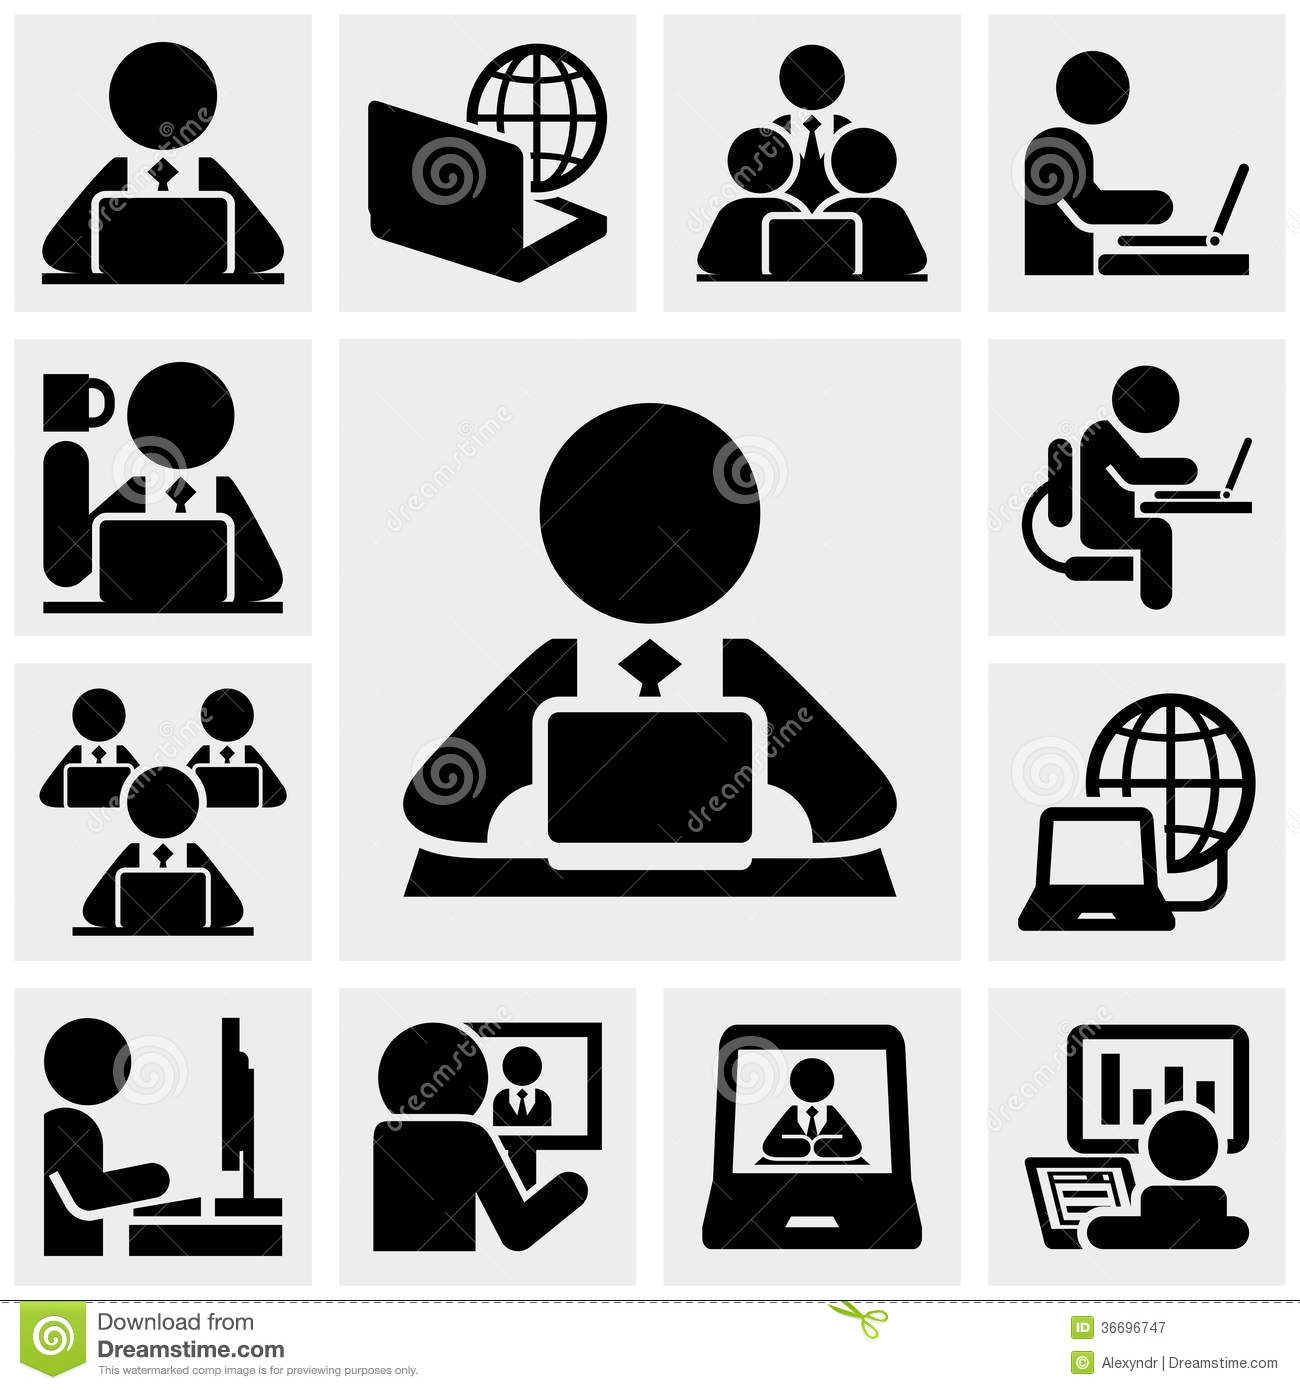 Computer And Technology Icons Stock Vector - Illustration of 